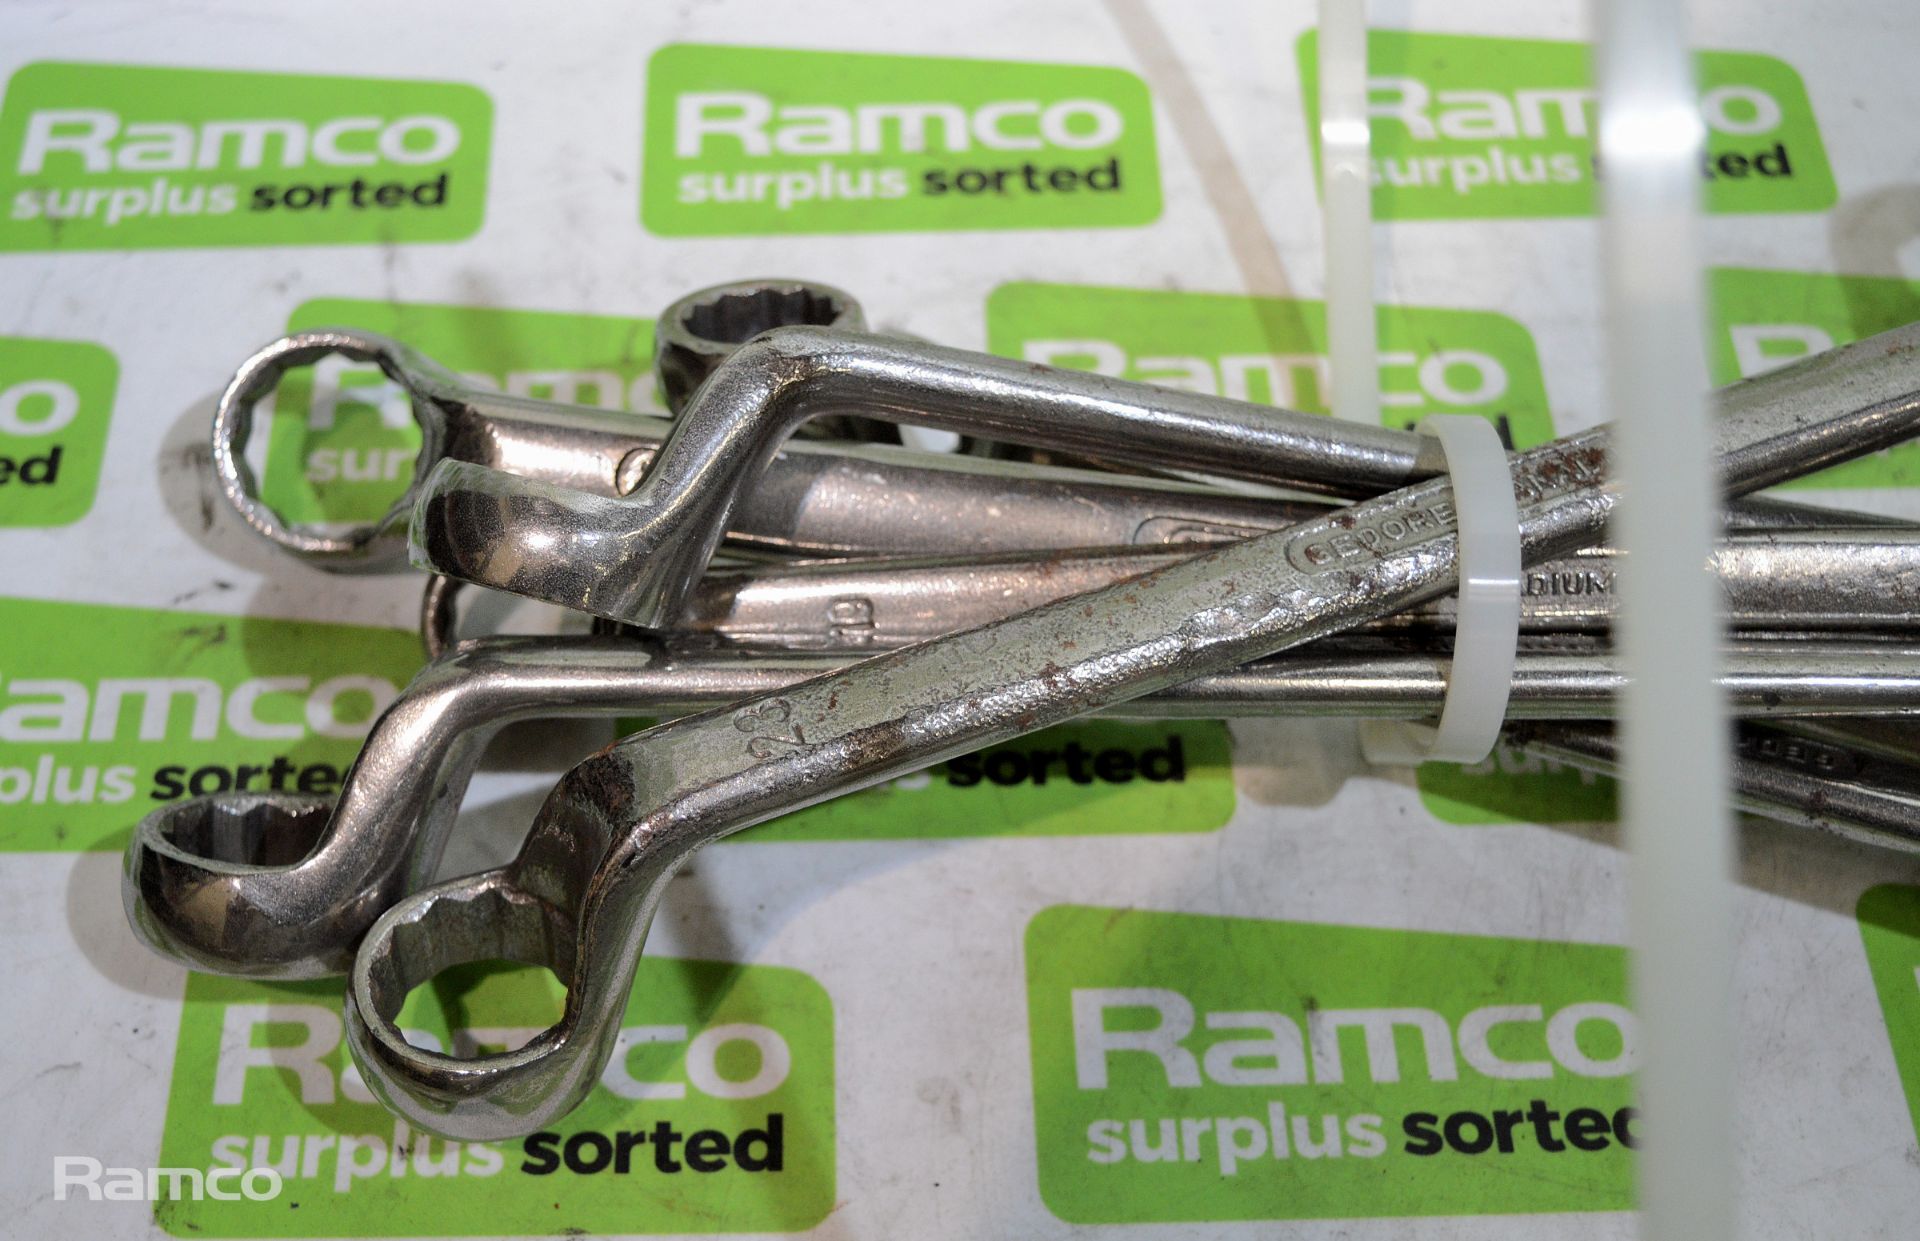 16x Ring Spanners - various sizes as seen in the pictures - Image 3 of 3